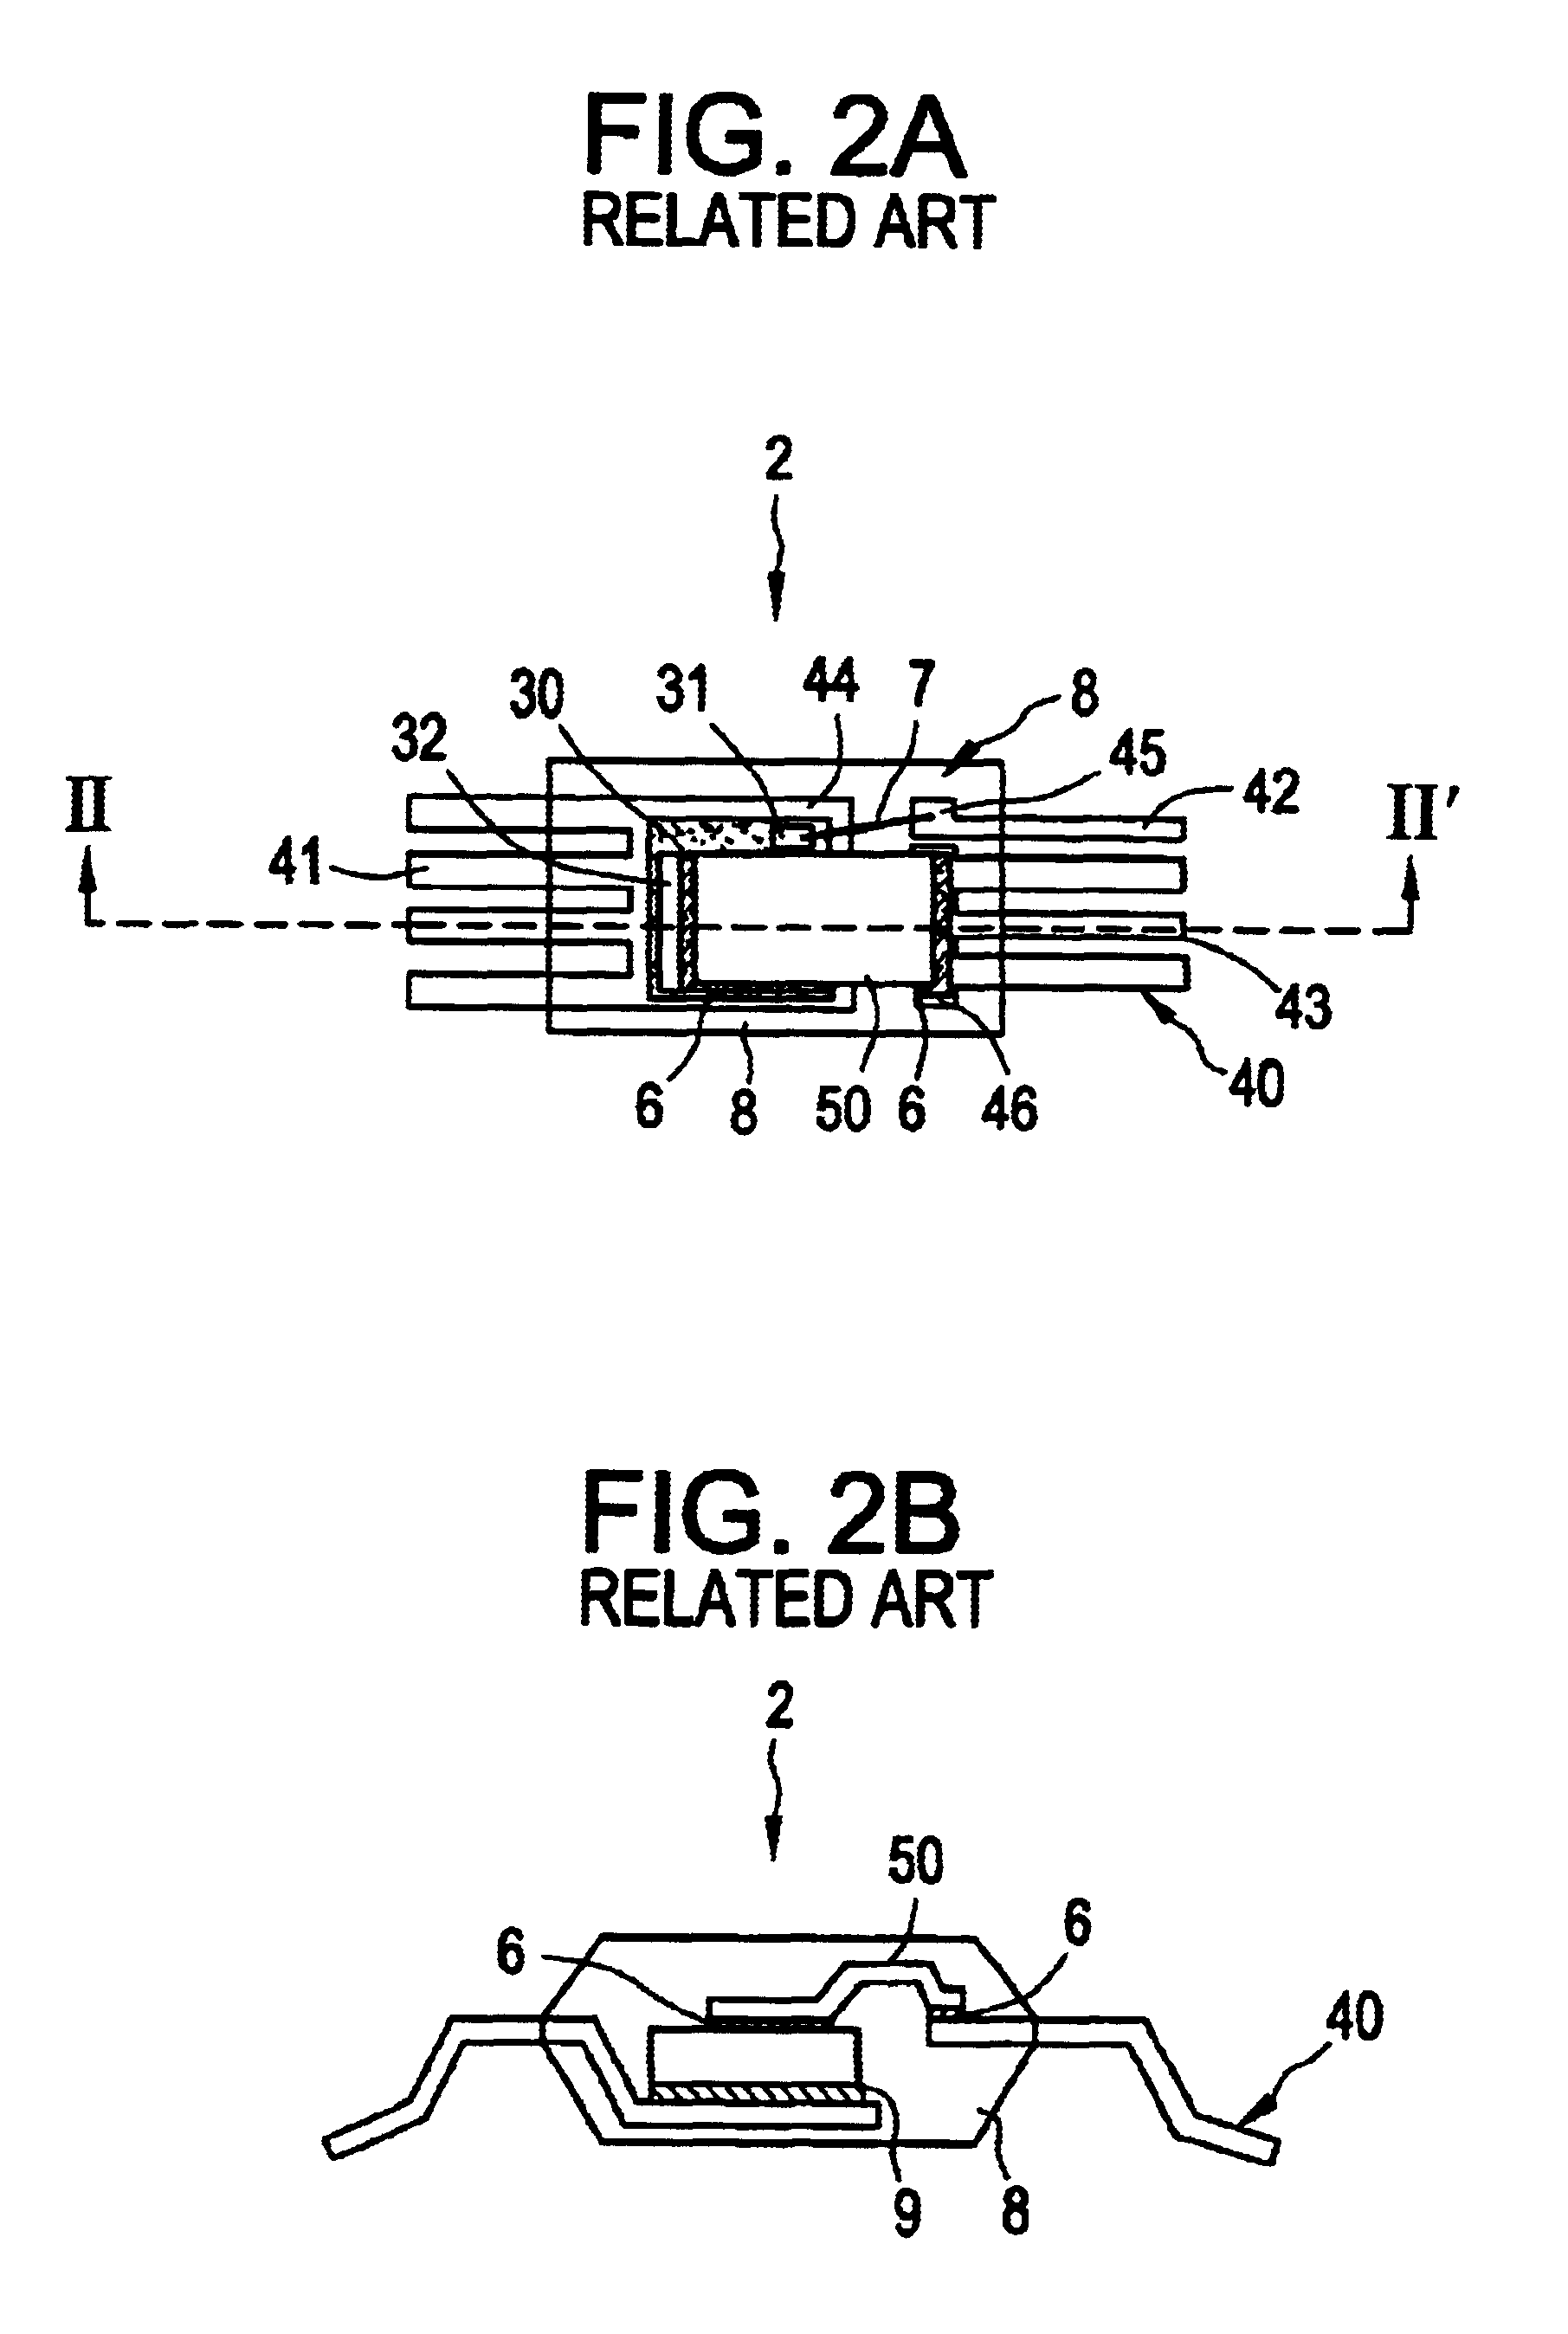 Semiconductor device with uneven metal plate to improve adhesion to molding compound